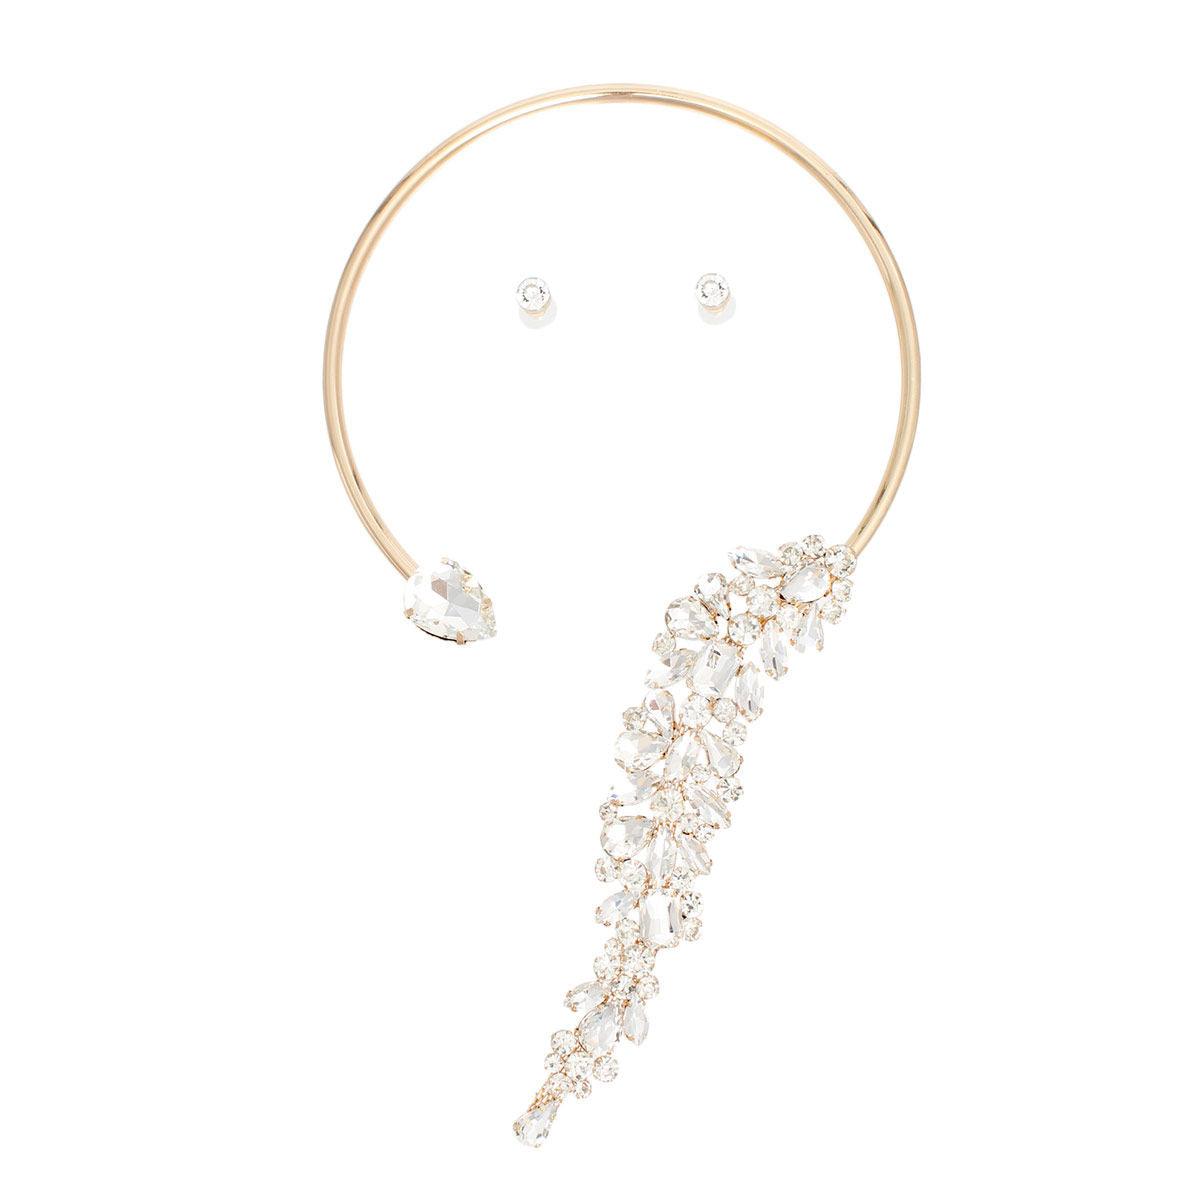 Shine Bright: Gold Clear Rhinestone Leaf Choker Necklace Set - Must-Have Accessory!